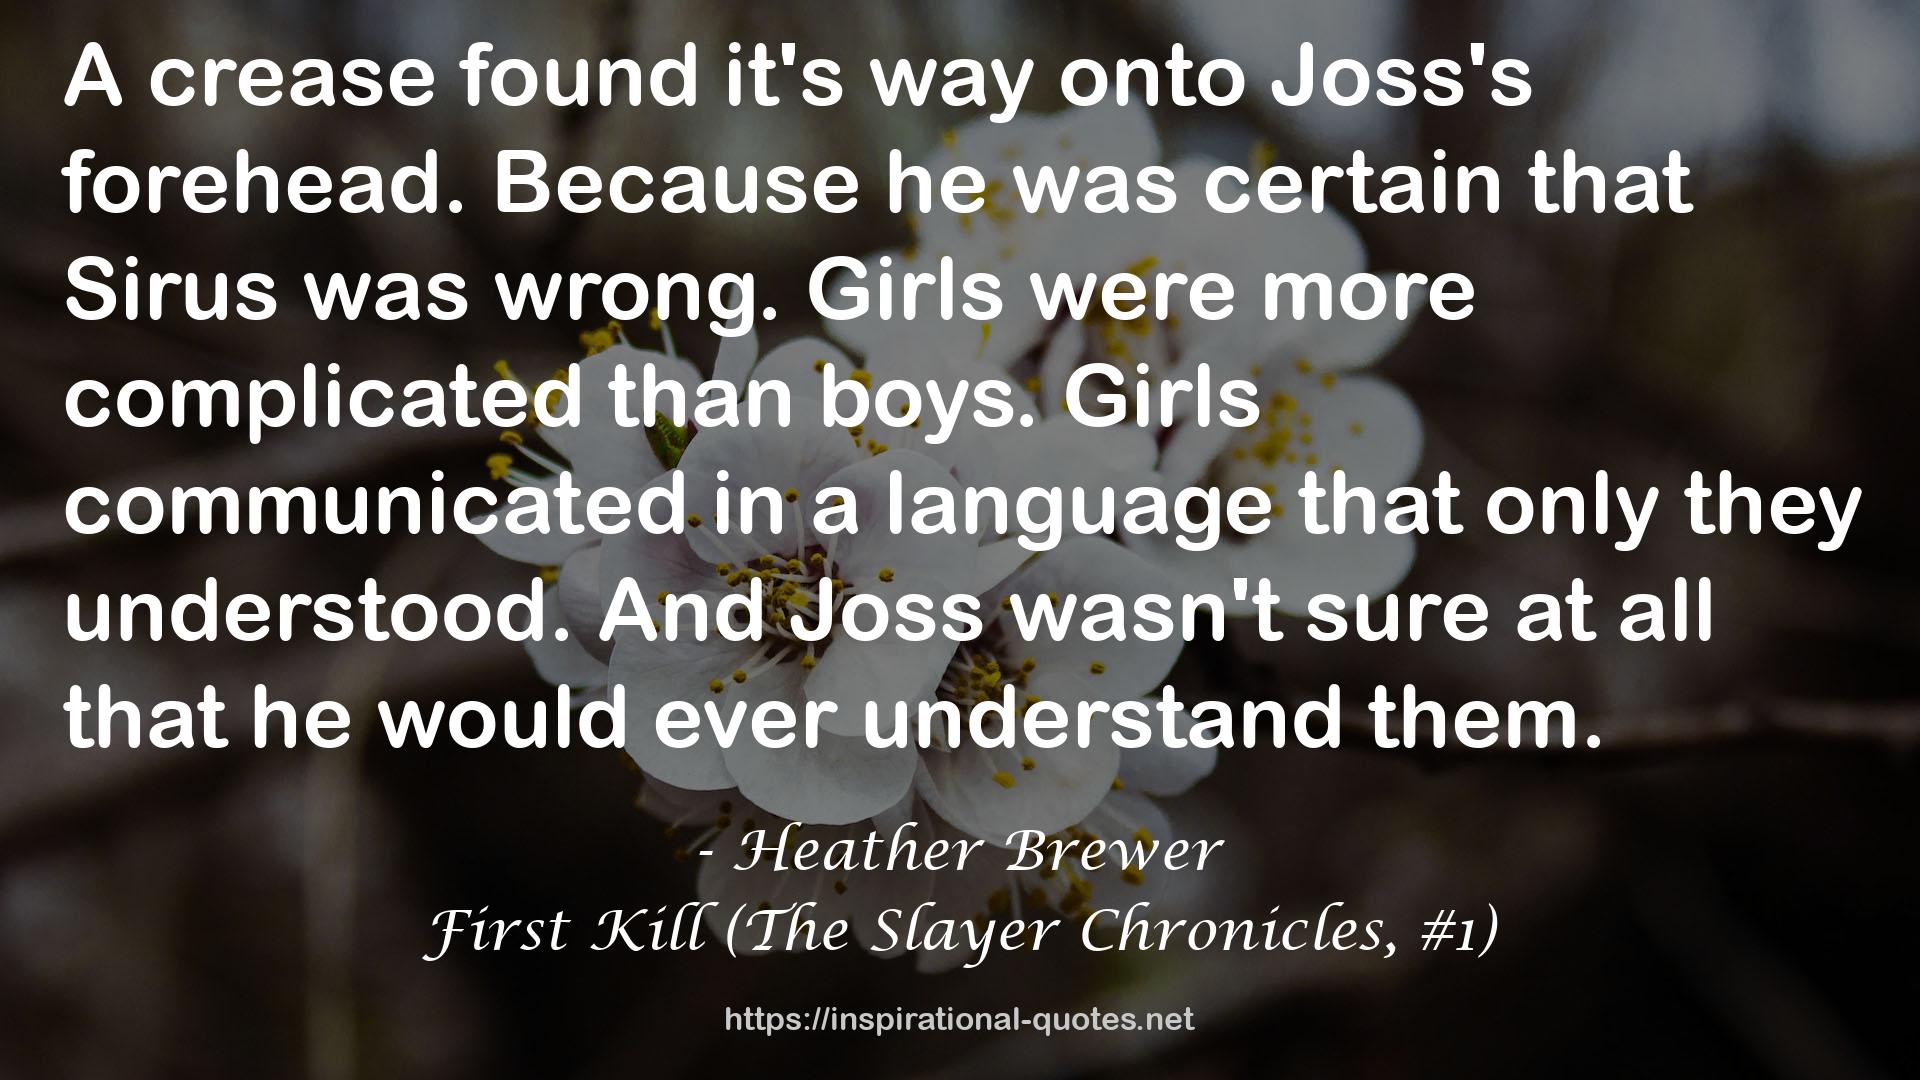 First Kill (The Slayer Chronicles, #1) QUOTES